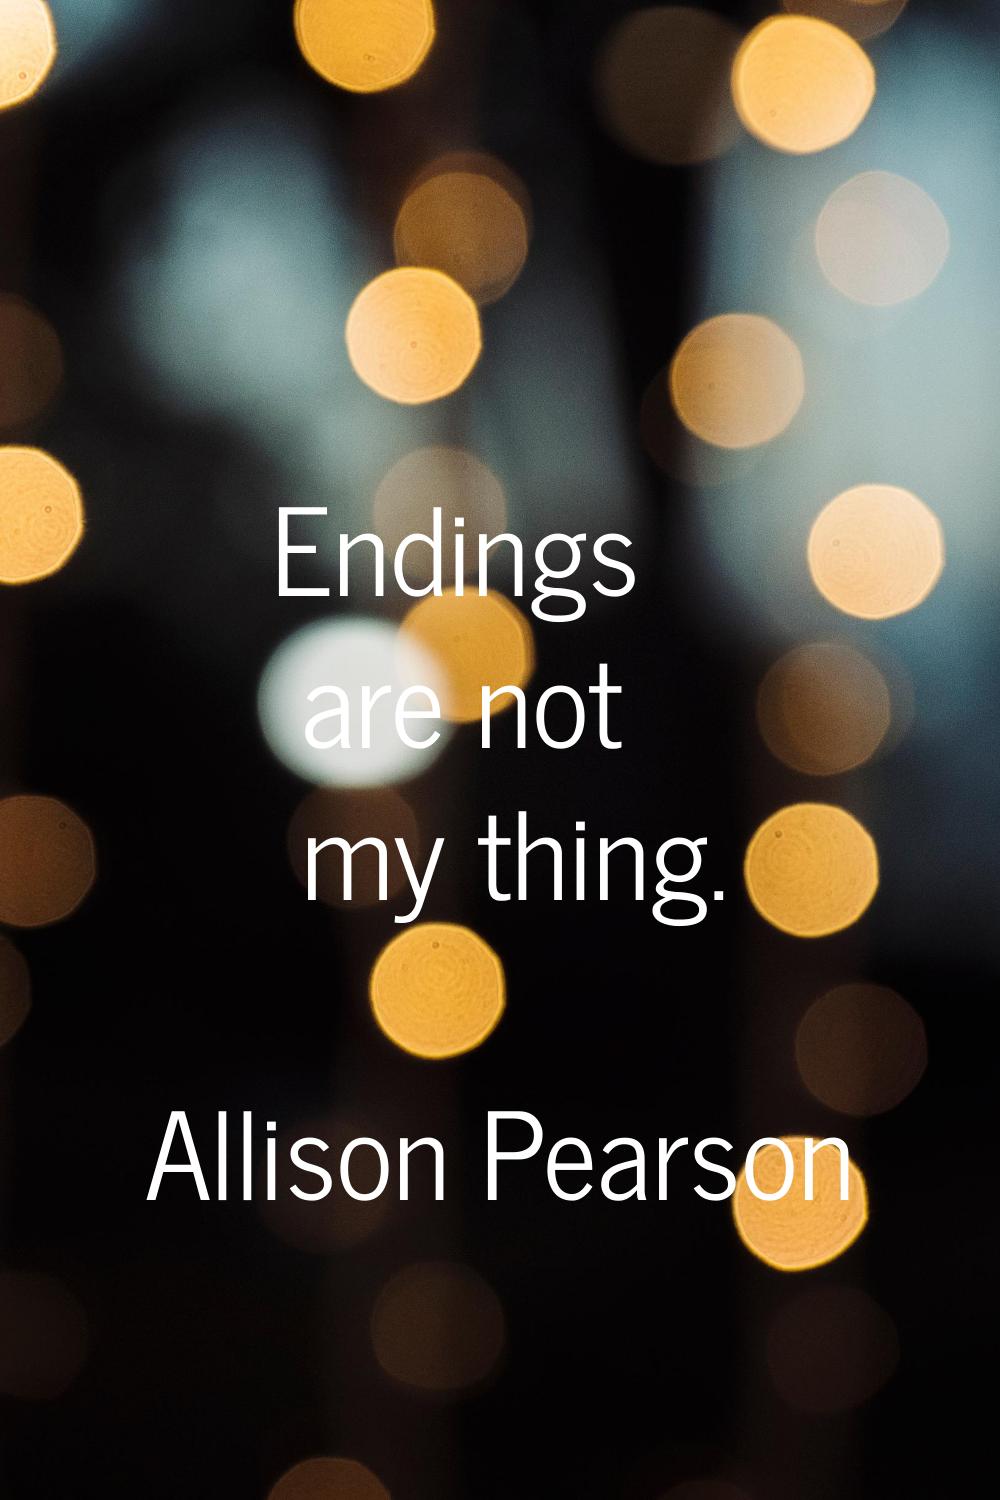 Endings are not my thing.